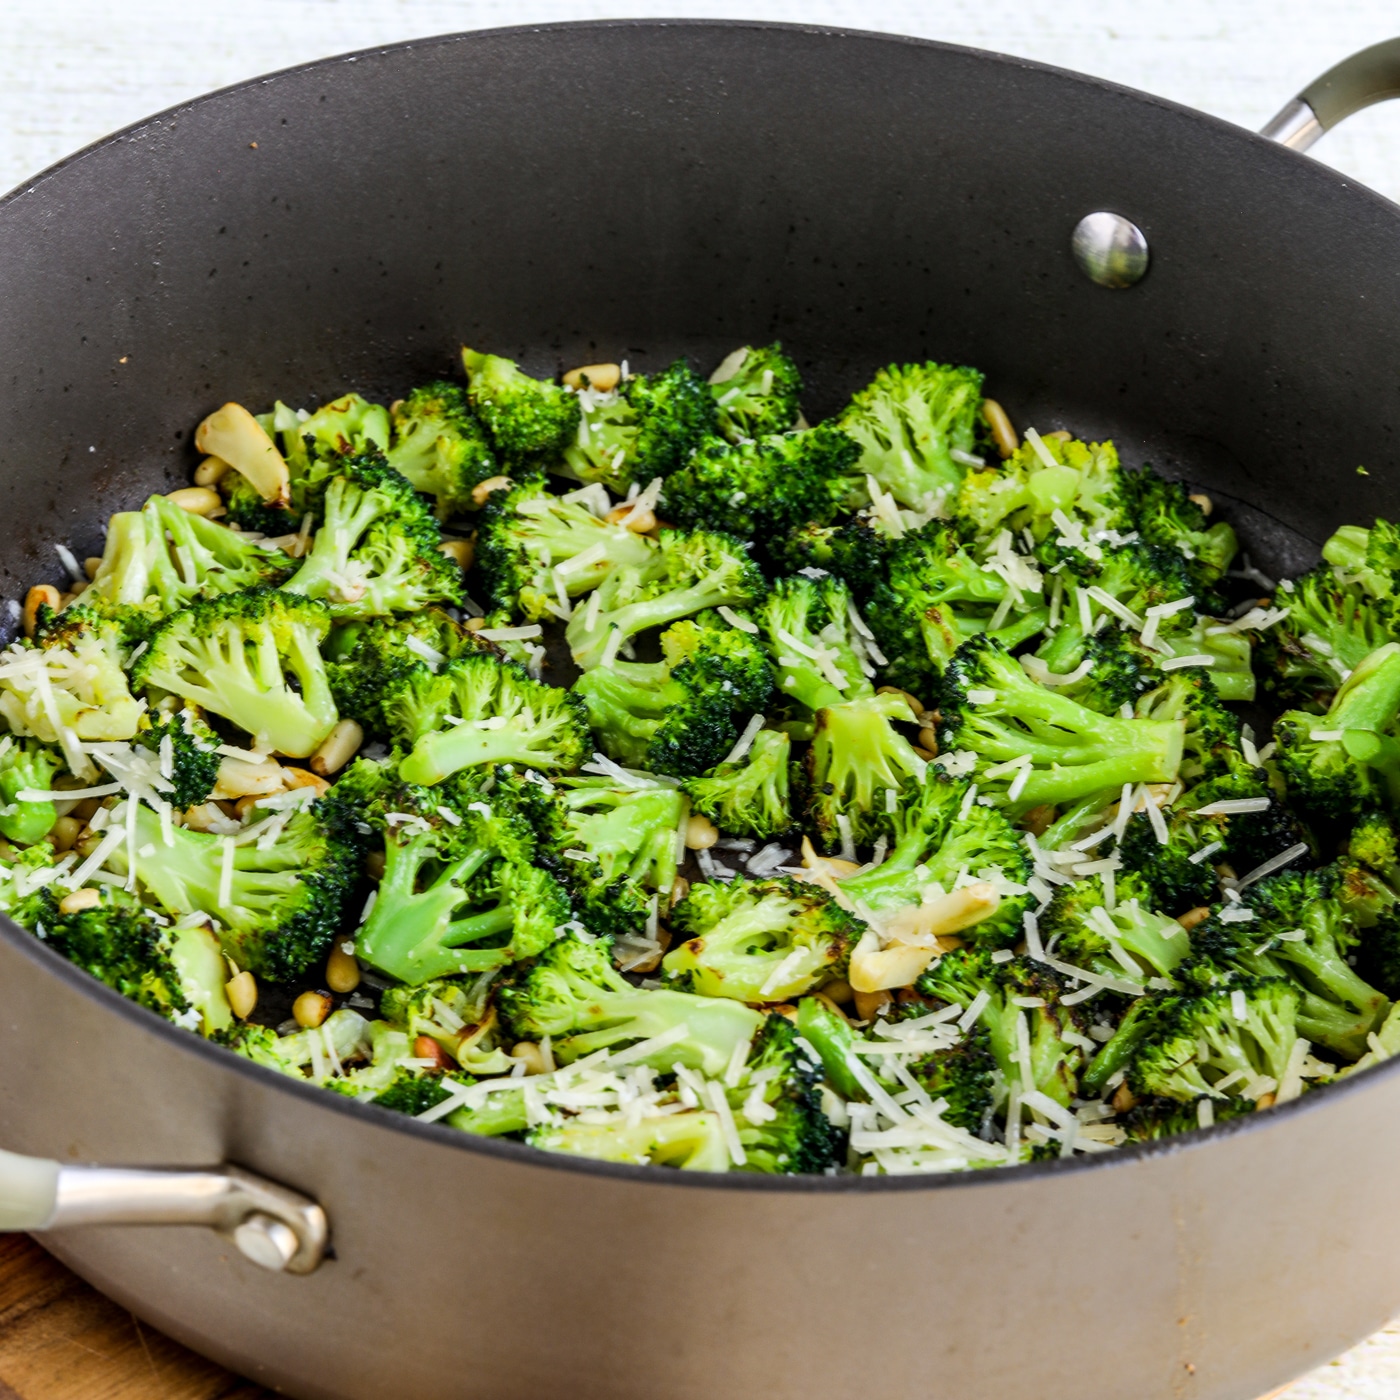 Pan-Fried Broccoli with Pine Nuts and Parmesan thumbnail image of broccoli in pan